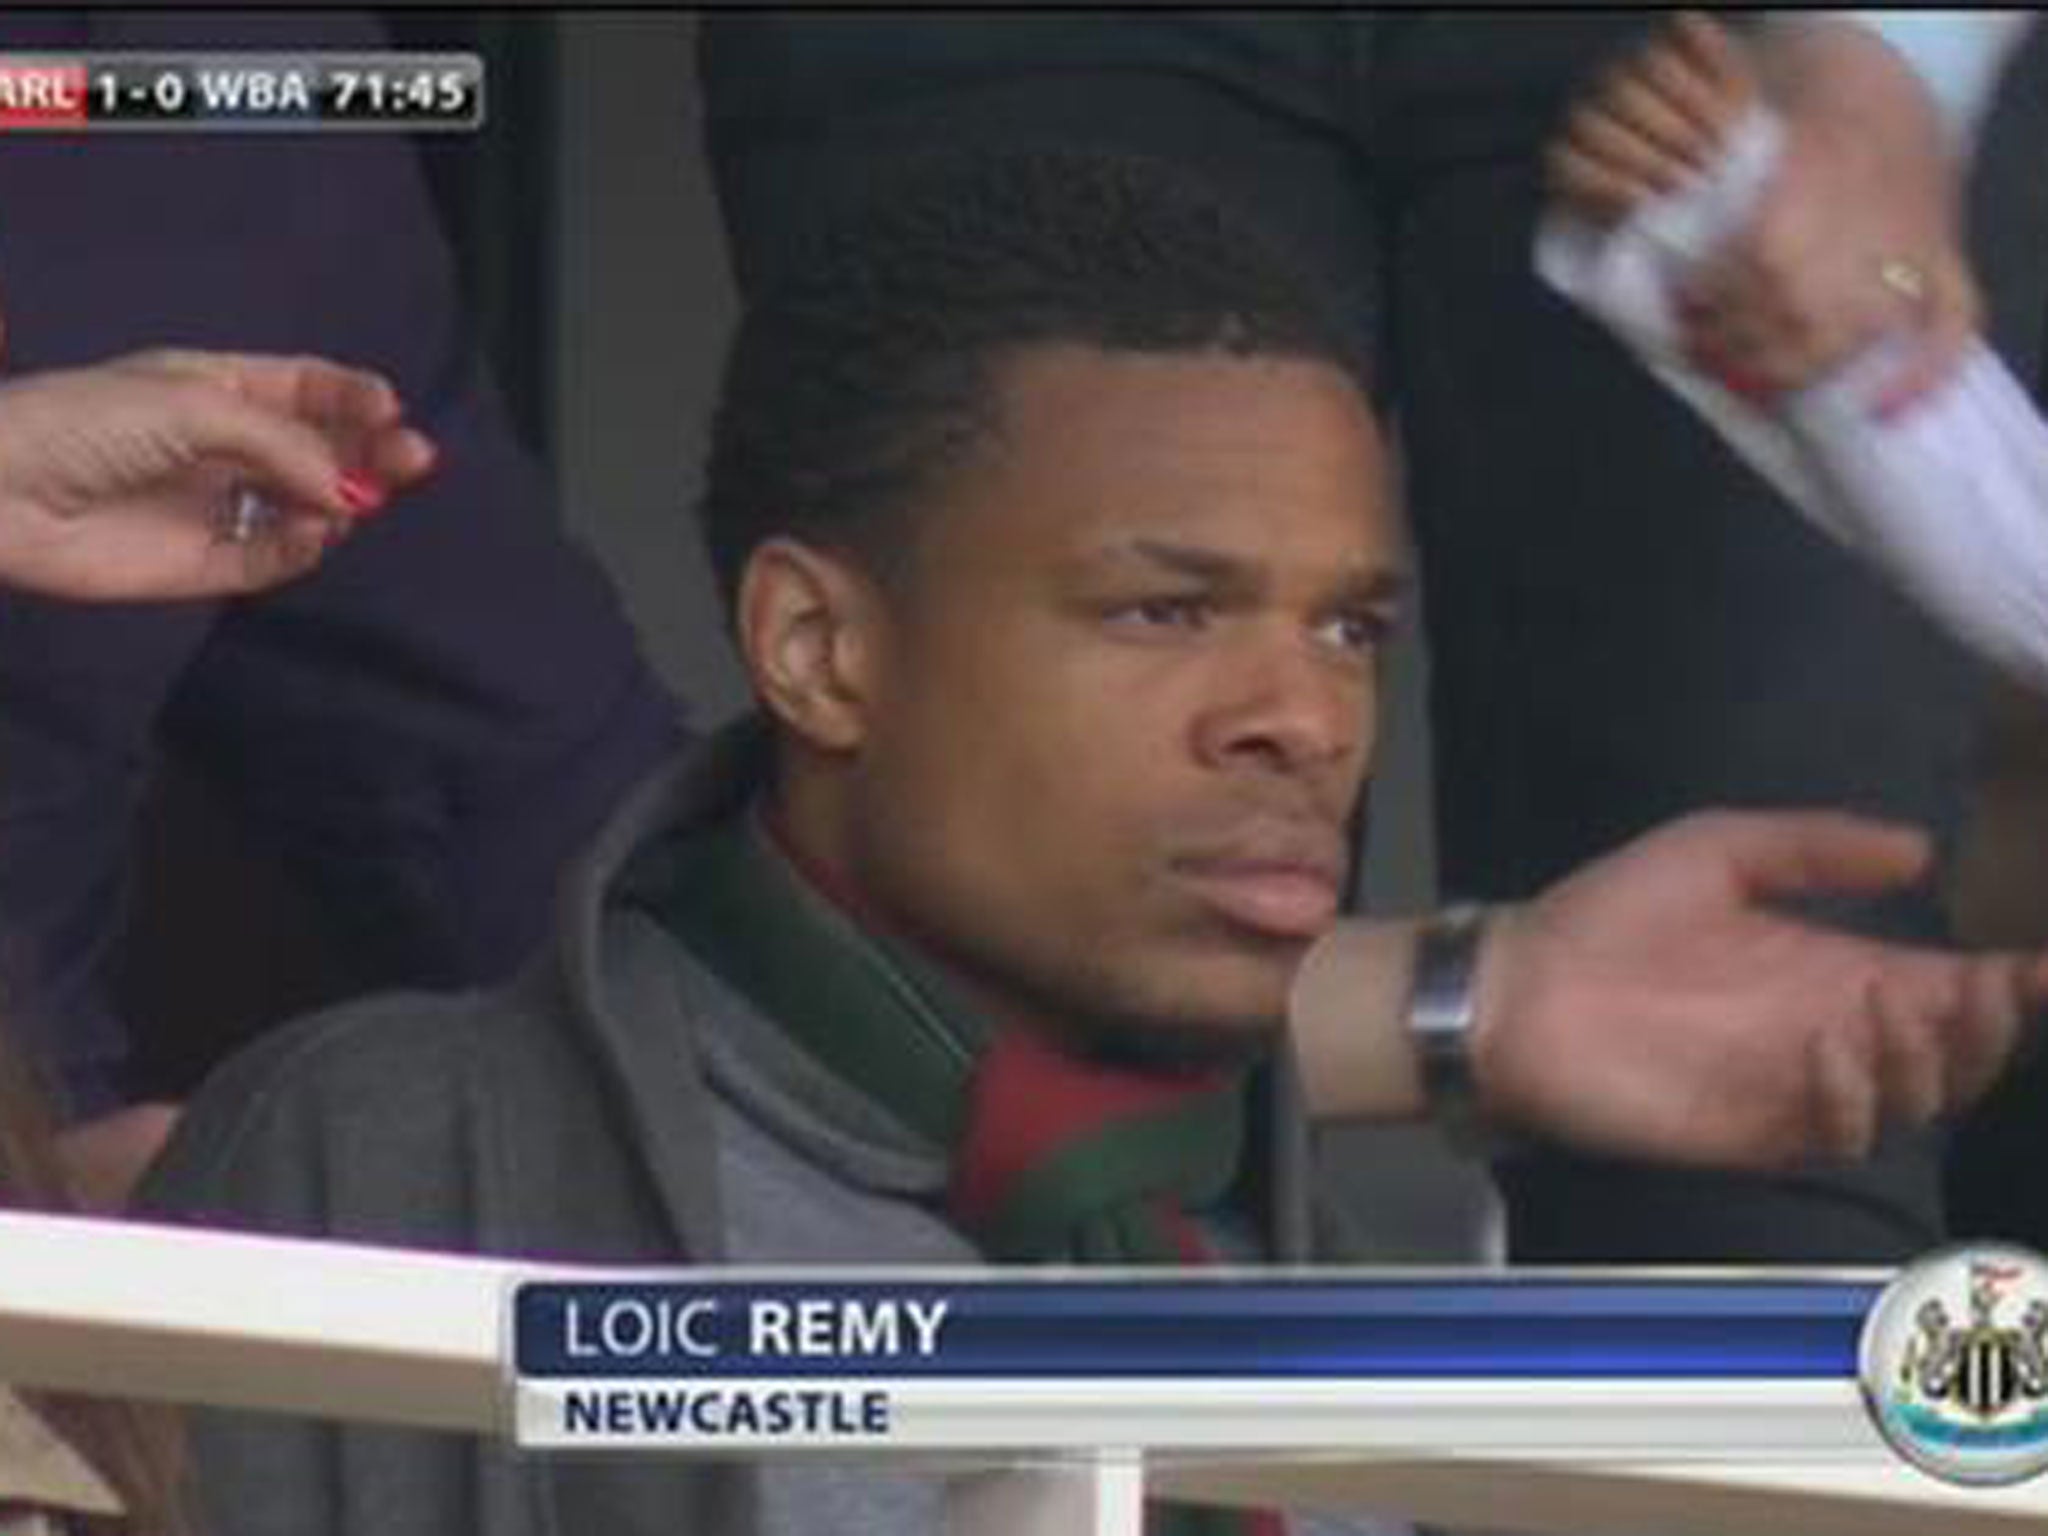 Loic Remy watches Arsenal's final home match of the season from the stands at the Emirates Stadium earlier this month